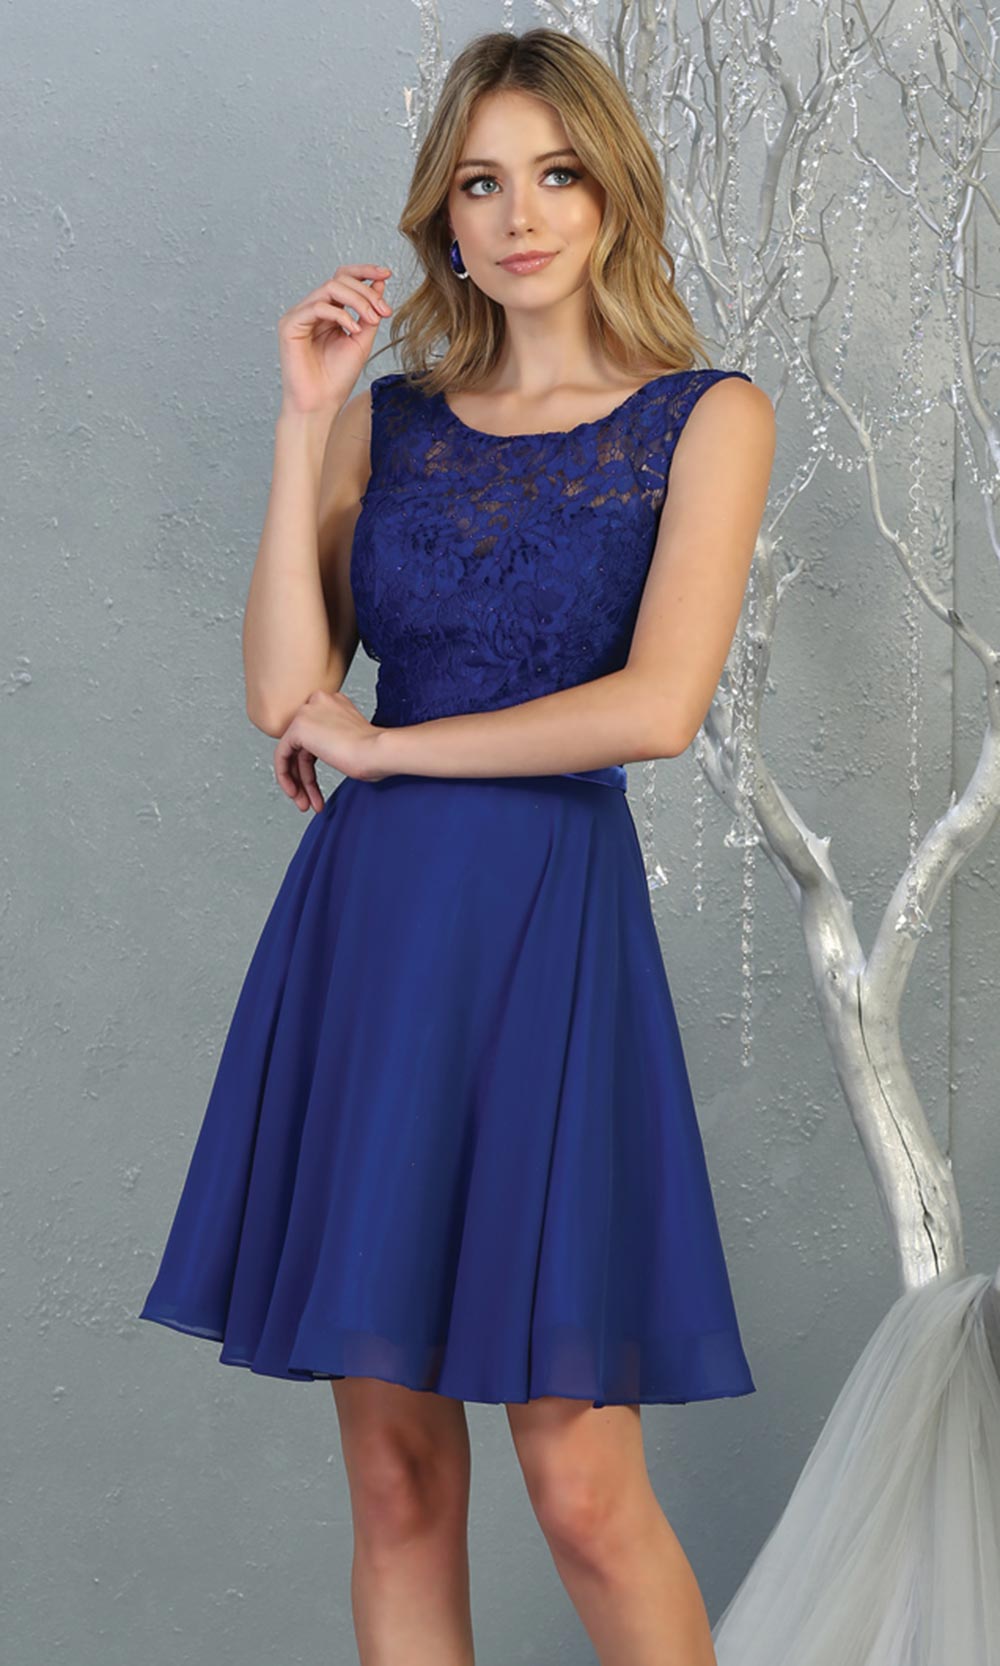 Mayqueen MQ1814 short royal blue high neck flowy grade 8 graduation dress w/ corset & simple skirt. Royal blue party dress is perfect for prom, graduation, grade 8 grad, confirmation dress, bat mitzvah dress, damas. Plus sizes avail for grad dress.jpg